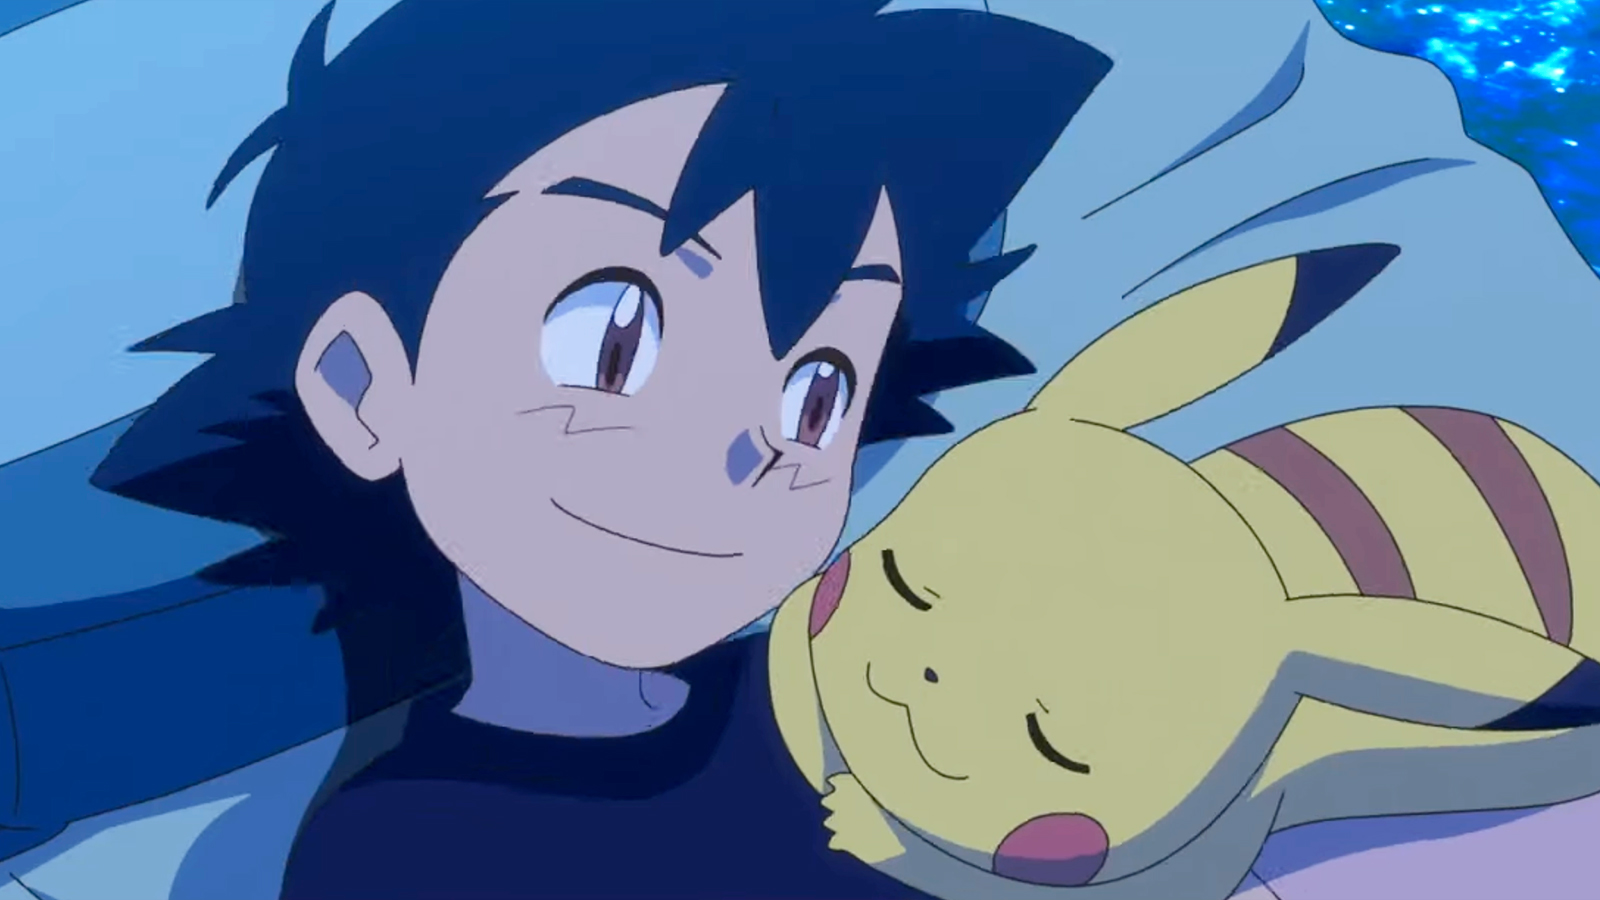 End of an era Pokémon retires Ash and his Pikachu after 25 years   VentureBeat